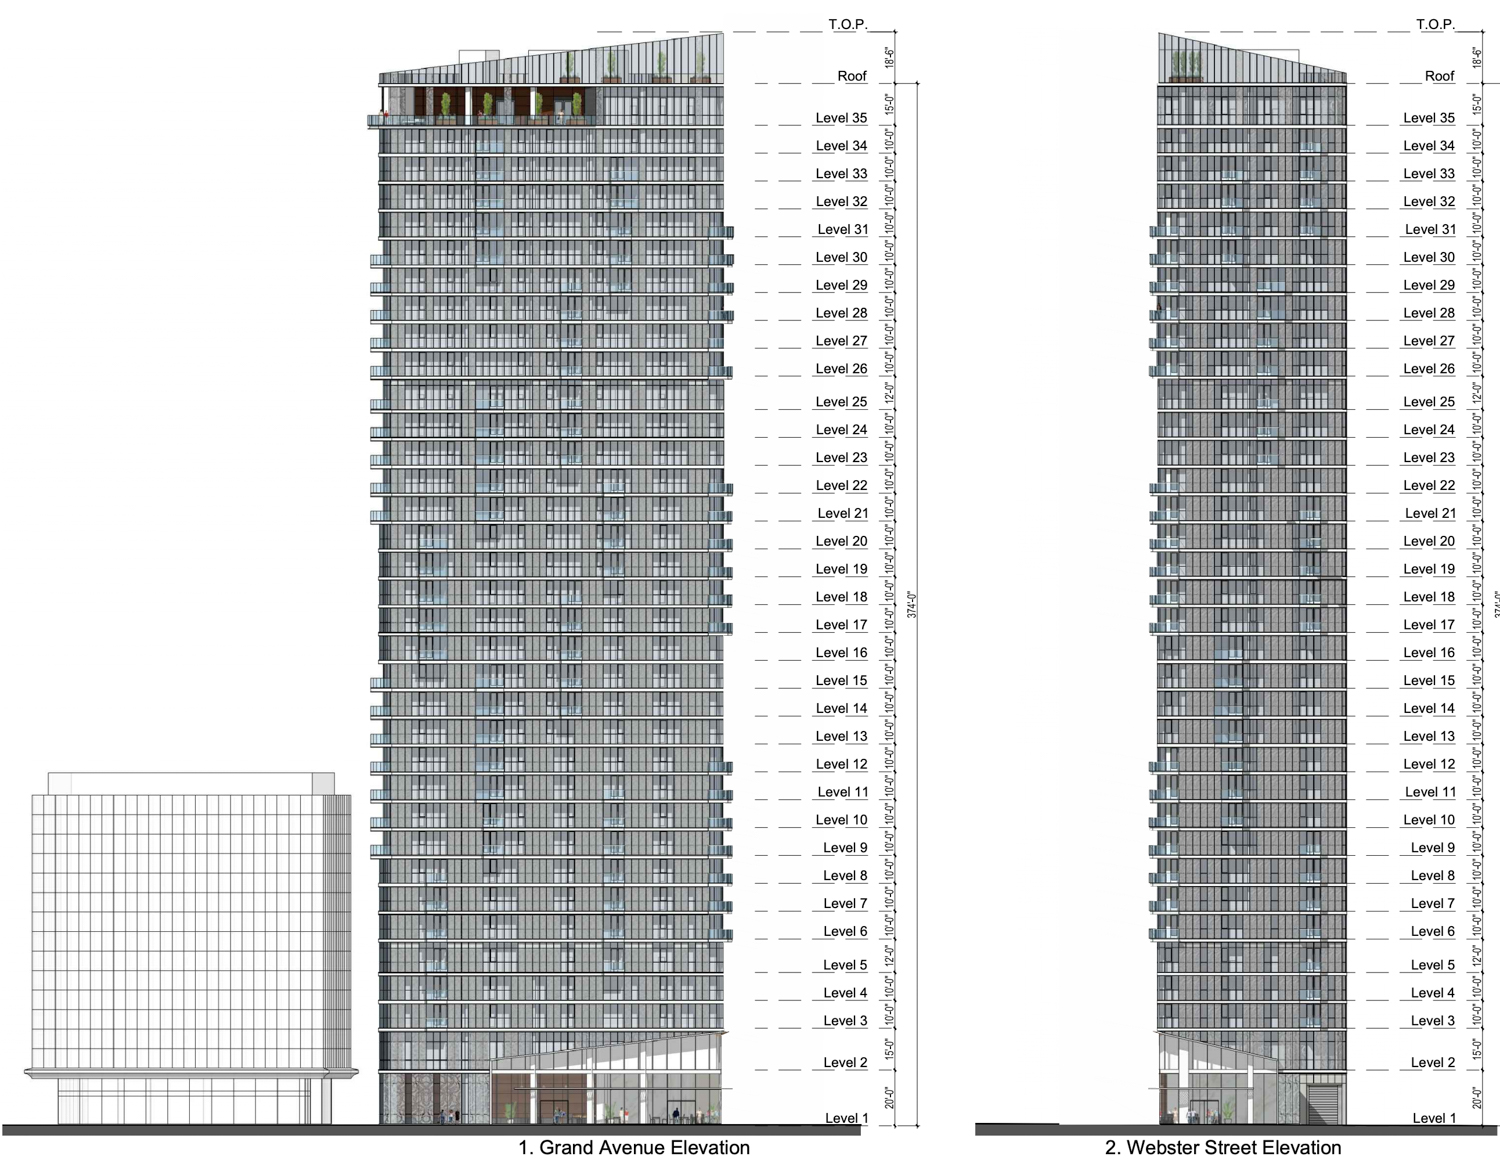 88 Grand Avenue vertical elevations, rendering by KTGY Architecture and Planning